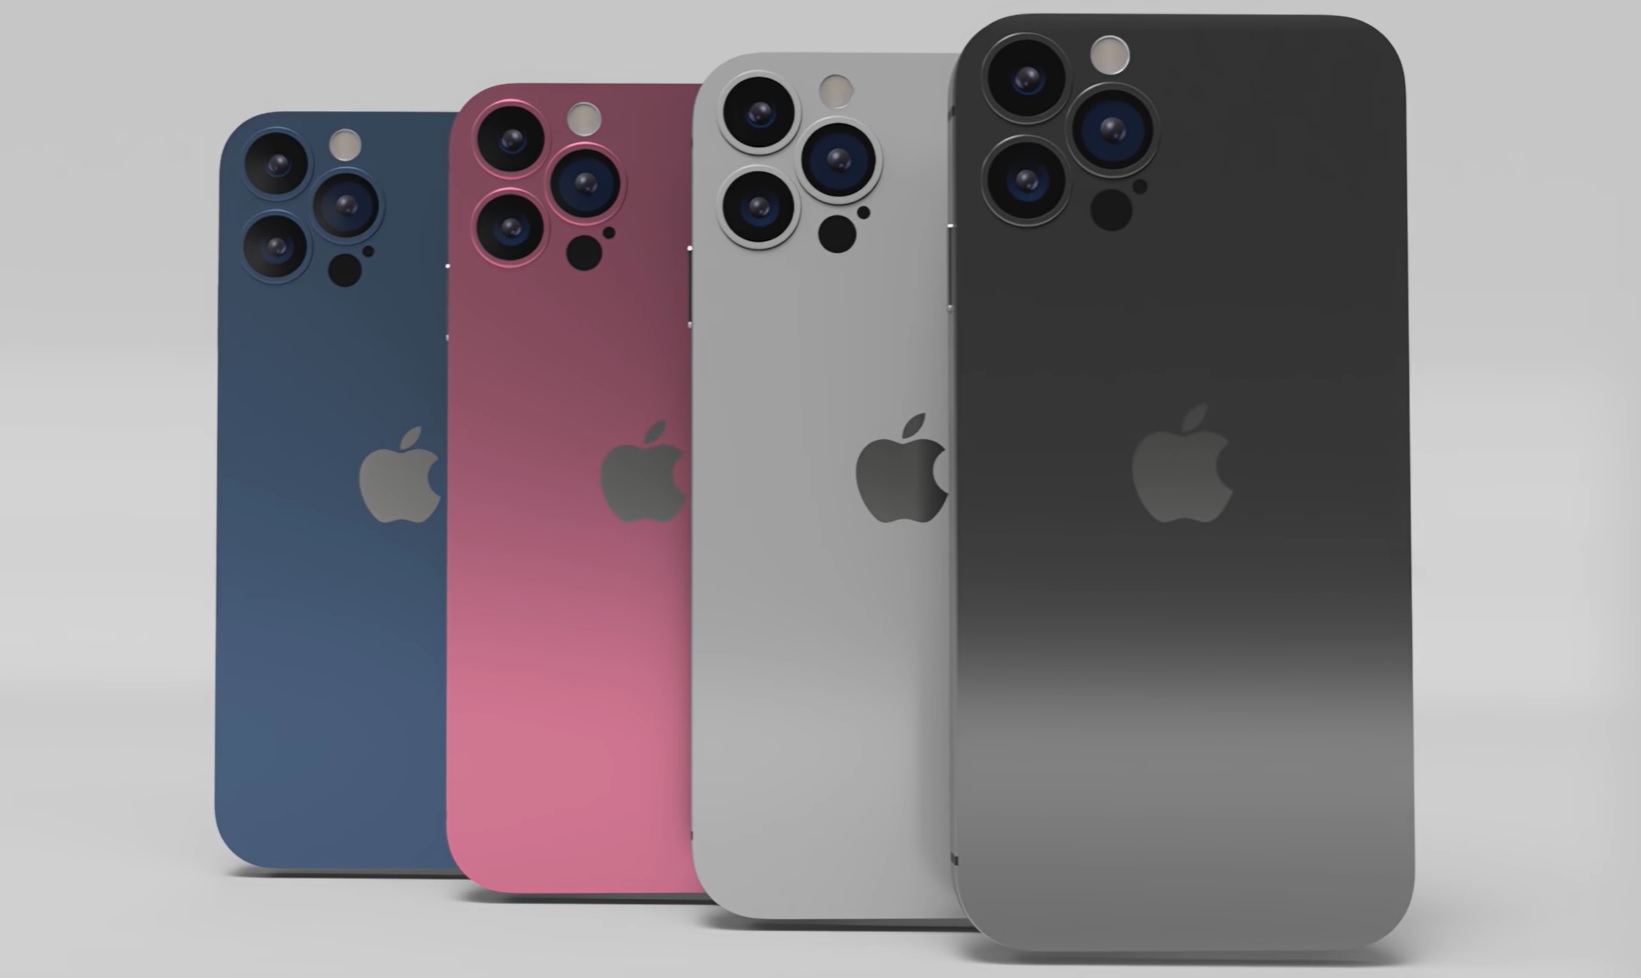 Alleged iPhone 14 price tags show hefty increases for Pro and Pro Max models  - NotebookCheck.net News